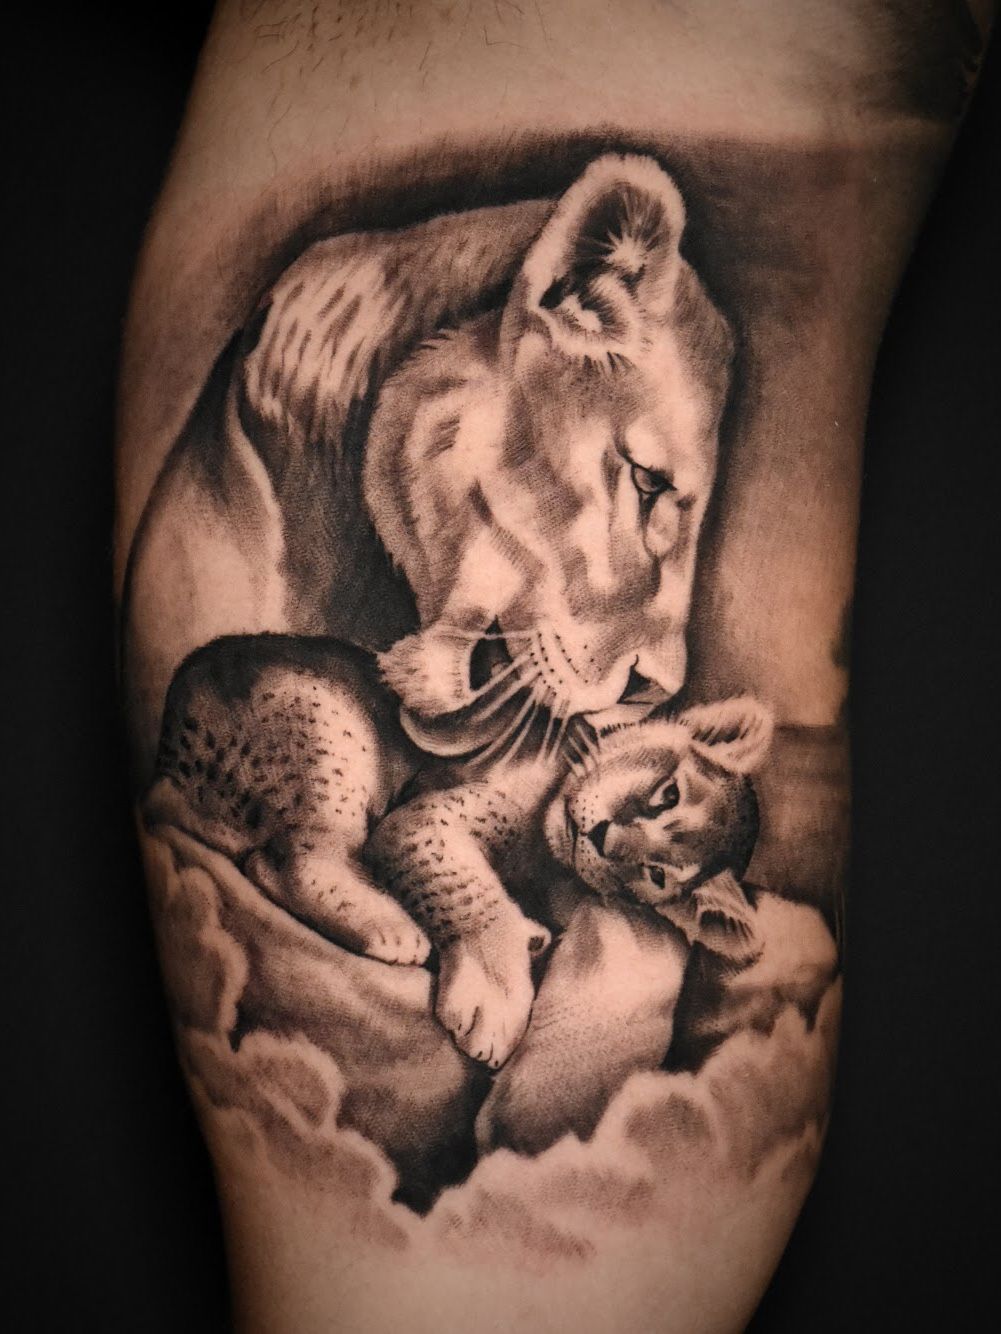 MagnumTattooSupplies on Twitter Lioness and cub by Stephanie Melbourne  Art and Tattoos using magnumtattoosupplies  liontattoo lionesstattoo  lioncubtattoo bnginksociety bngtattoo blackandgrey blackandgreytattoo  skinartmag silverbackink 